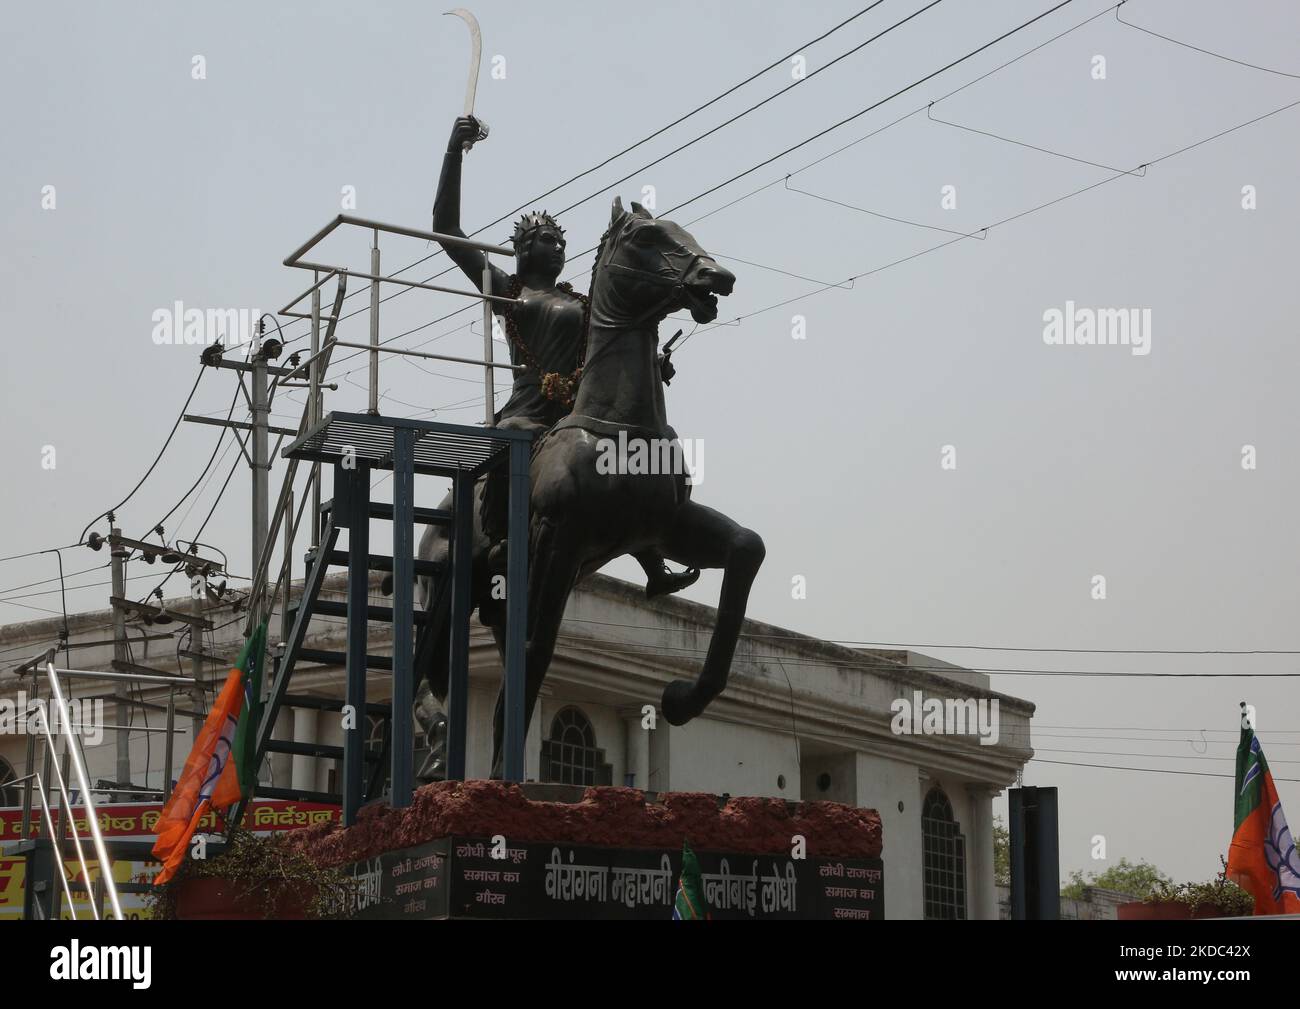 Rani Lakshmi Bai statue in the city of Agra, Uttar Pradesh, India, on May 06, 2022. Rani Lakshmi Bai (also known as Veerangana Avanti Bai Lodhi, Rani Lakshmibai, Jhansi ki Rani and Lakshmibai) was Rani of Jhansi (1828 – 1858), was the queen of the princely state of Jhansi in North India (now in Jhansi district in Uttar Pradesh). She was one of the leading figures of the Indian Rebellion of 1857 and became a symbol of resistance to the British Raj for Indian nationalists. (Photo by Creative Touch Imaging Ltd./NurPhoto) Stock Photo